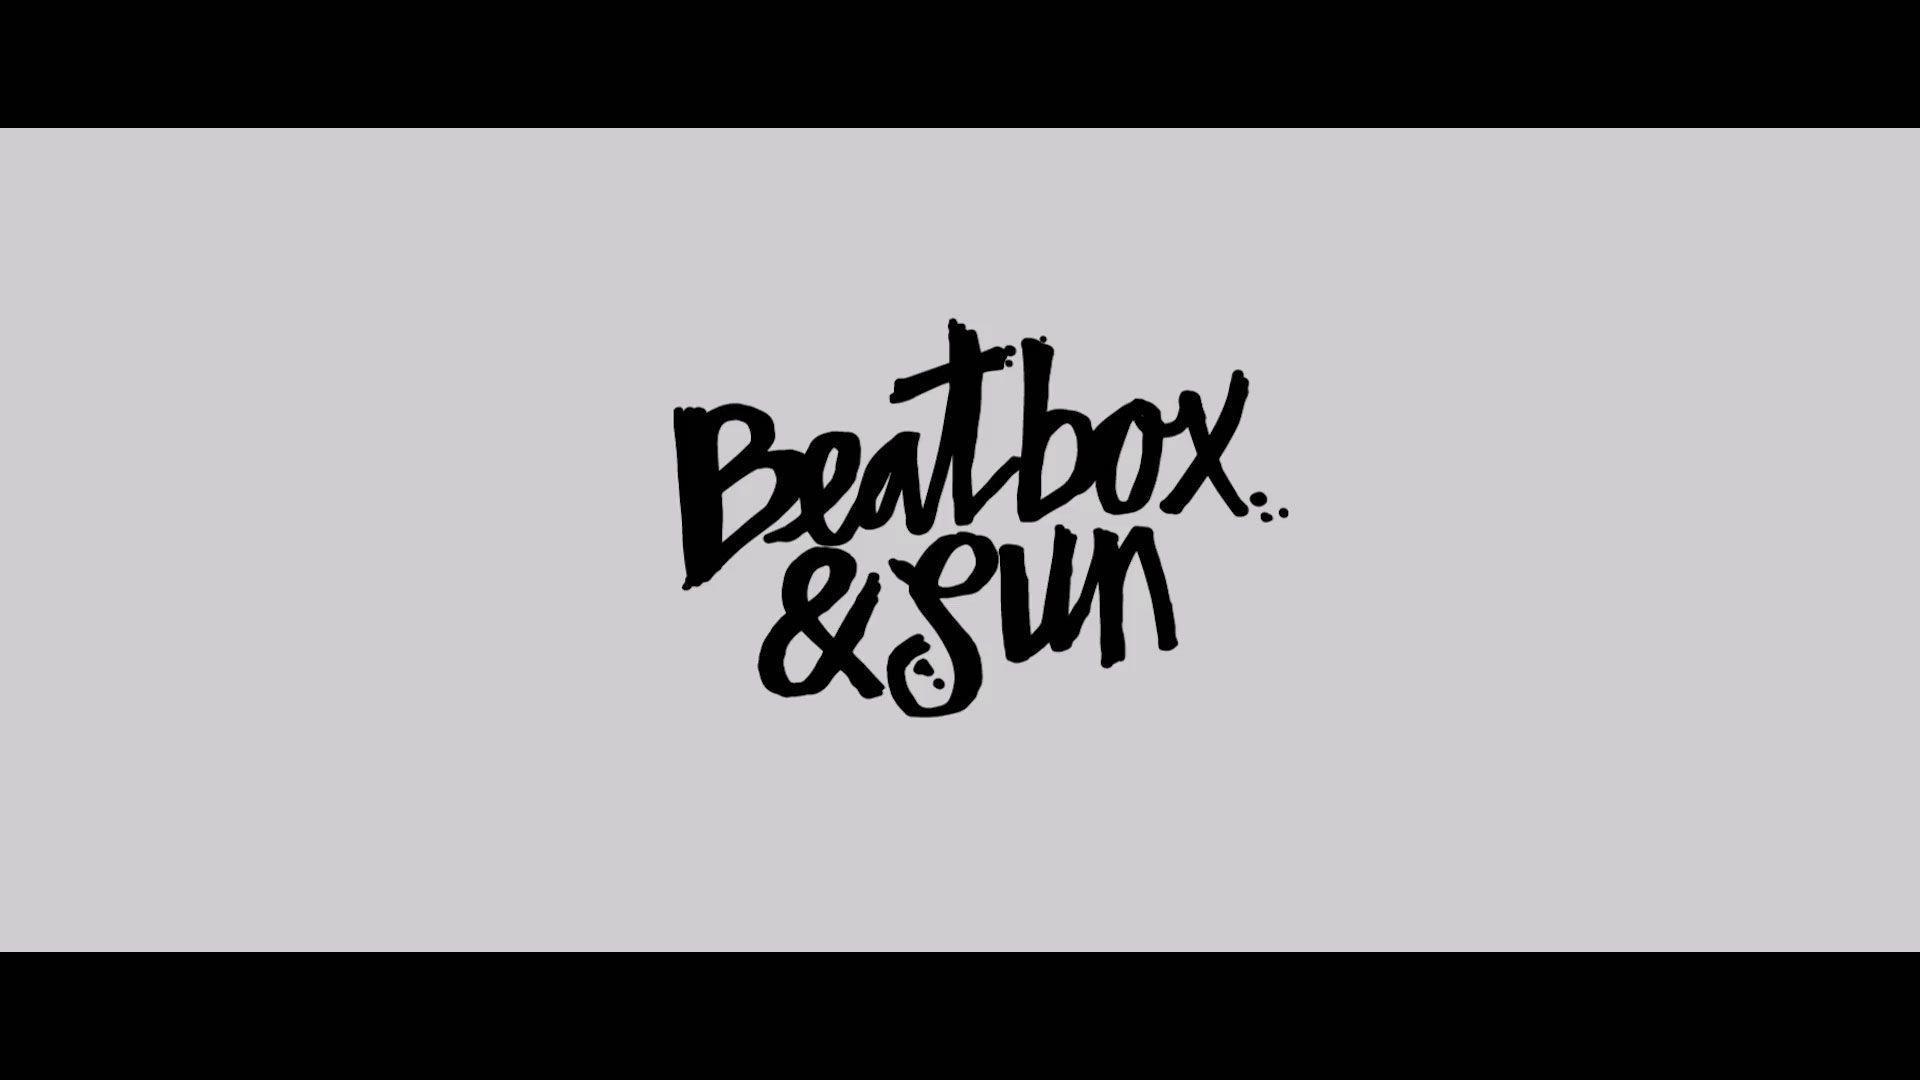 High Quality Beatbox Wallpaper. Full HD Picture